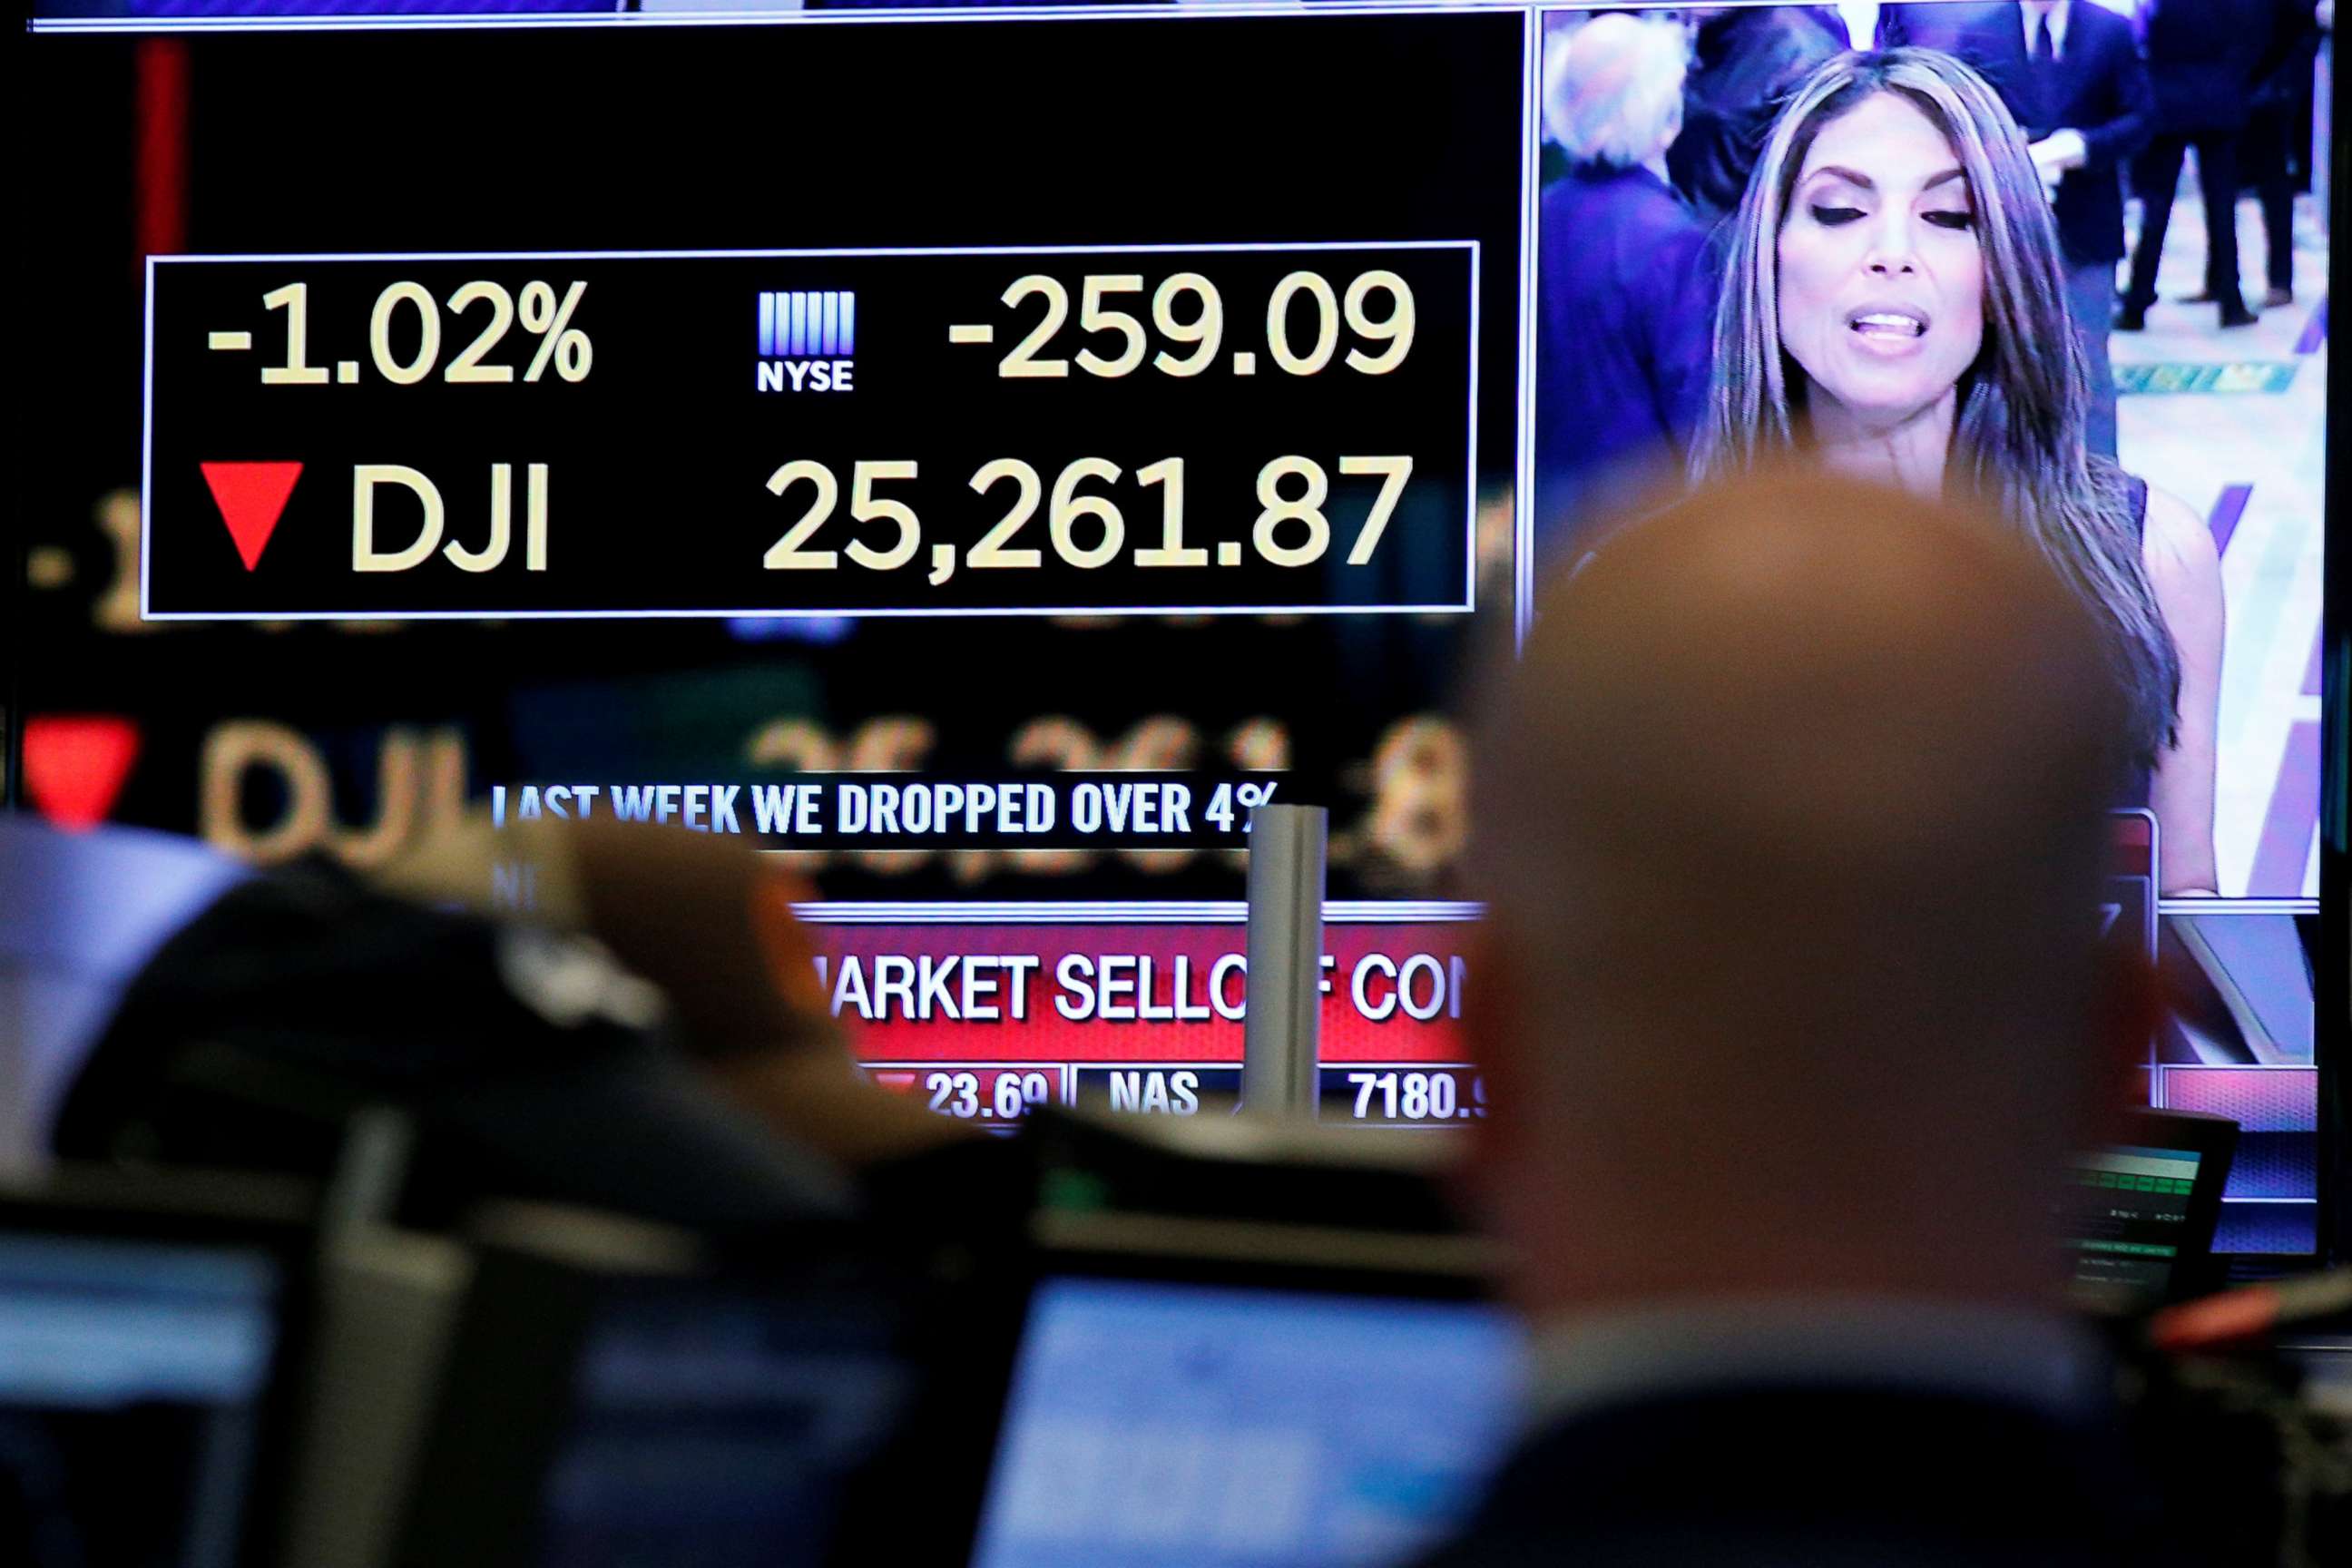 PHOTO: A trader looks at a screen displaying the Dow Jones Industrial Average on the floor of the New York Stock Exchange in New York City, Feb. 5, 2018.